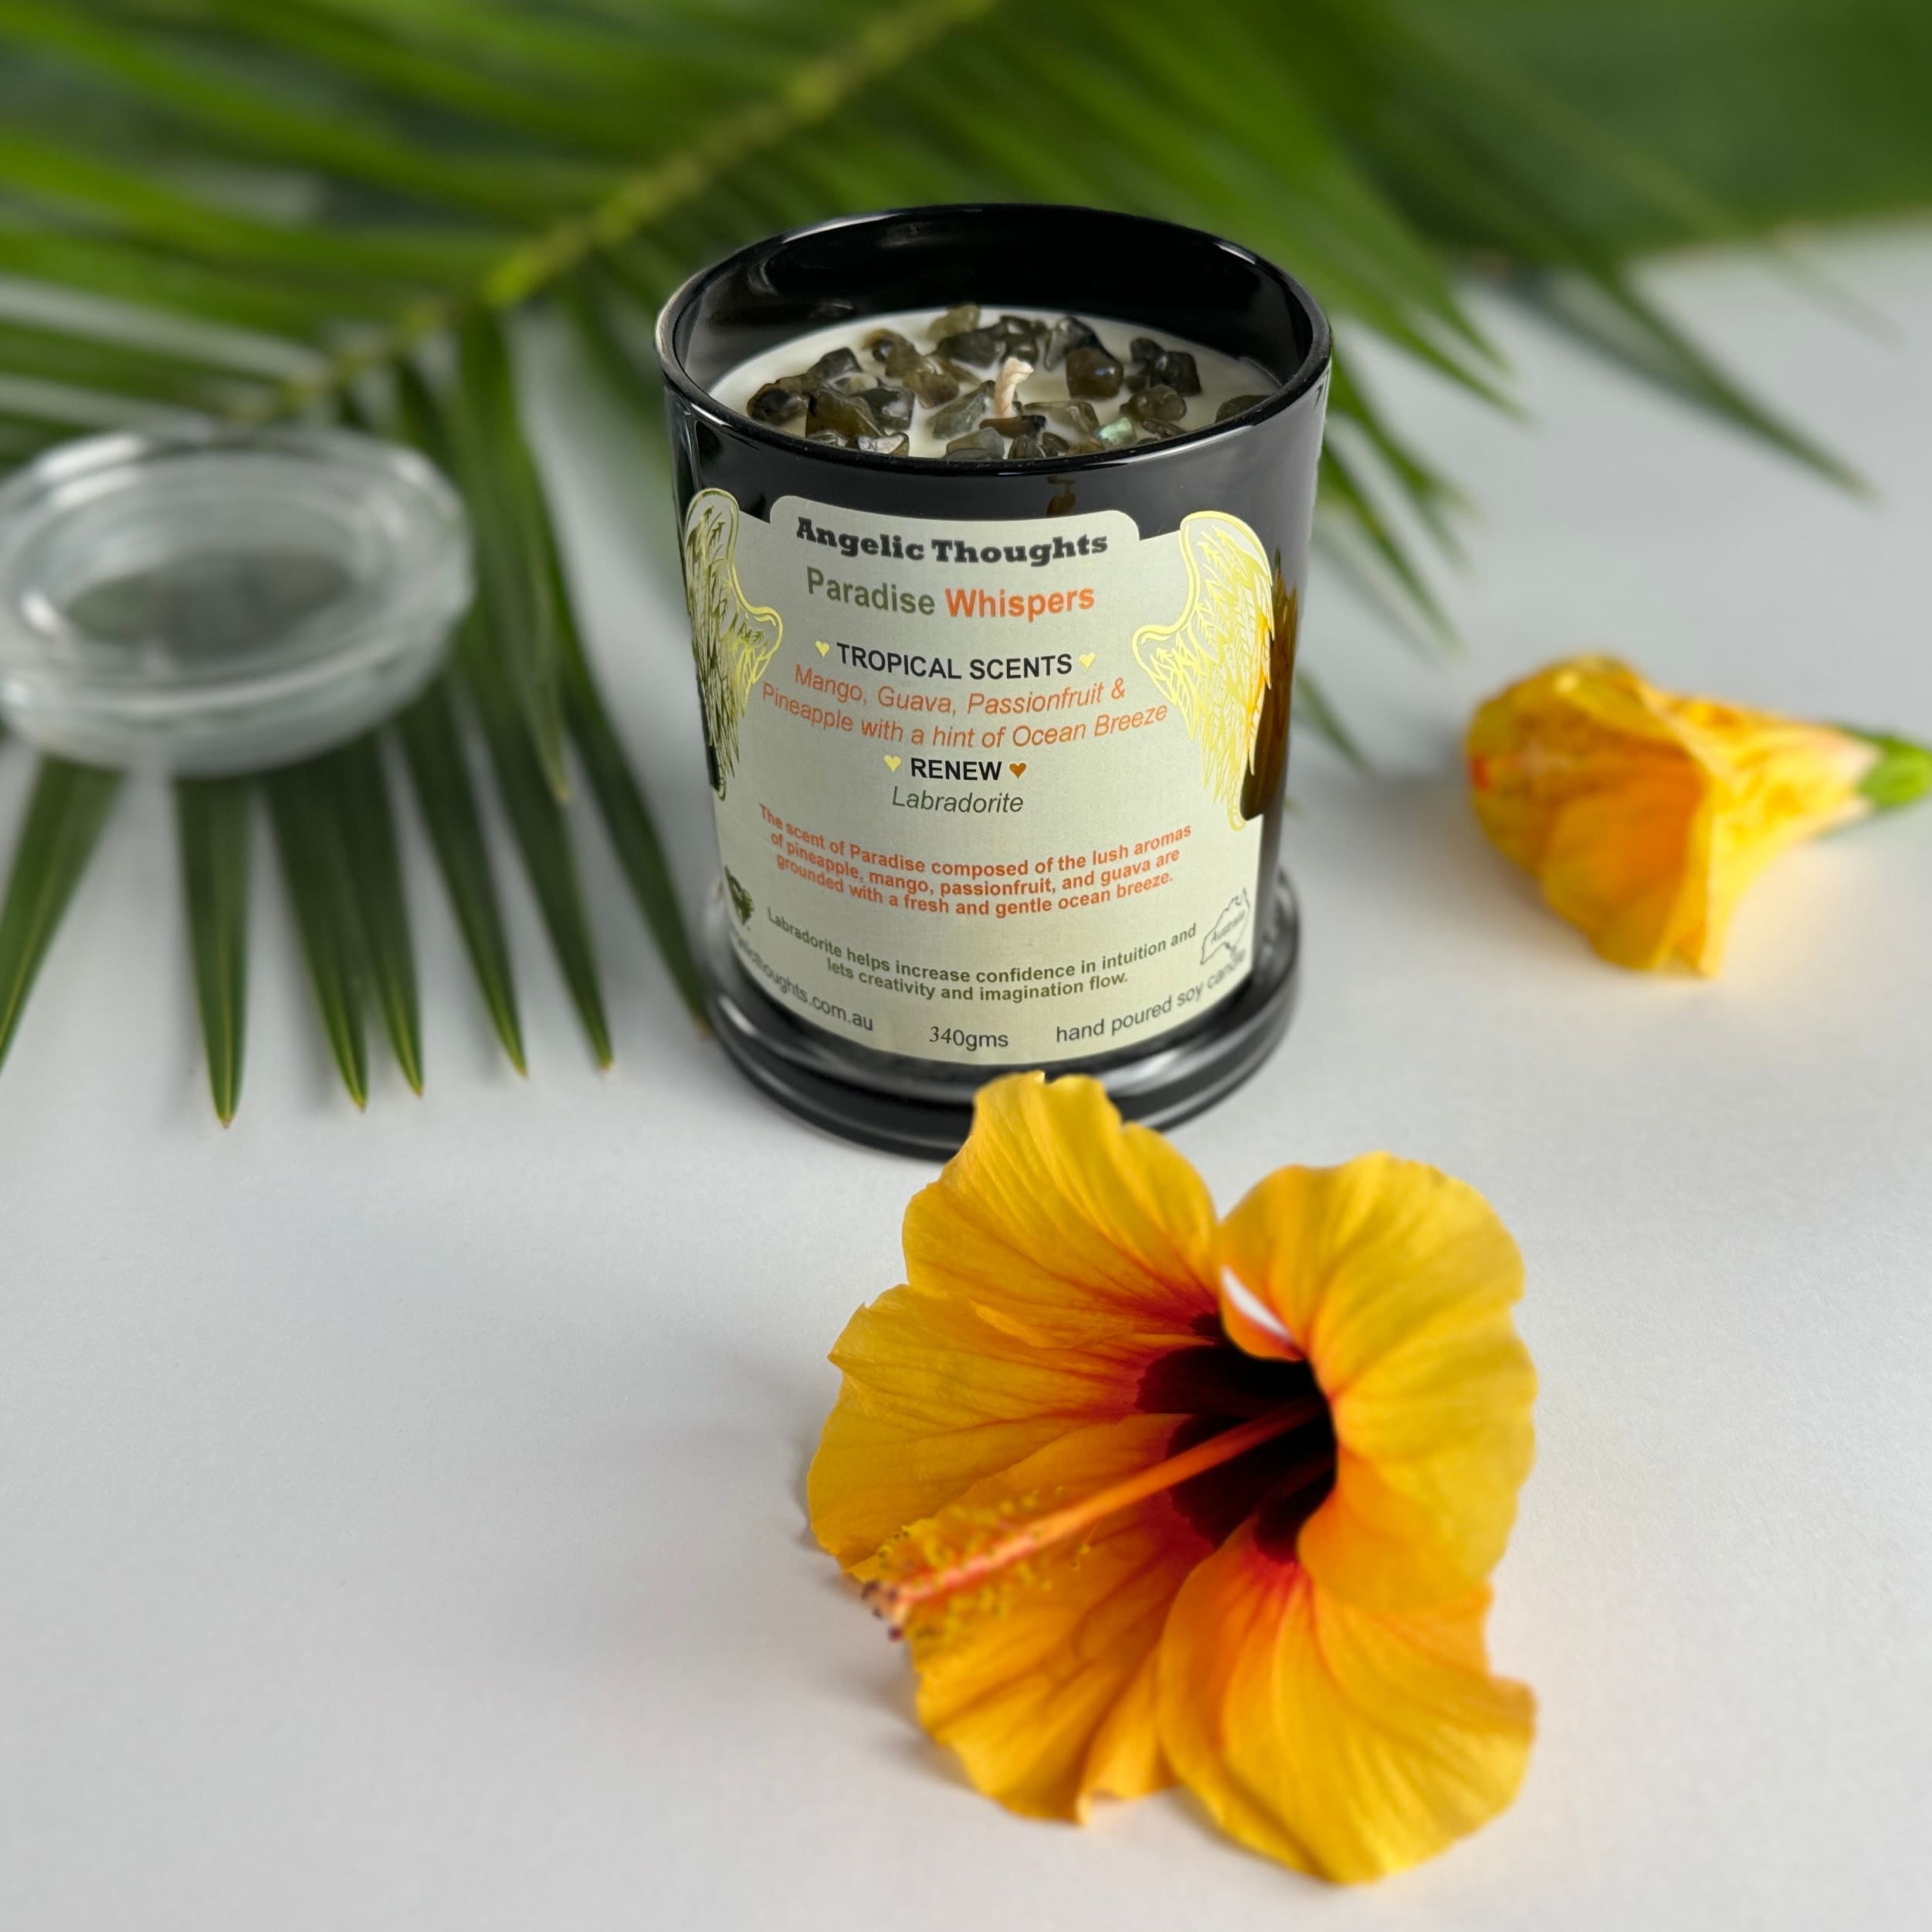 Golden orange hibiscus in foreground with Paradise Whispers Candle in black simplicity glass container with standard angelic thoughts product label